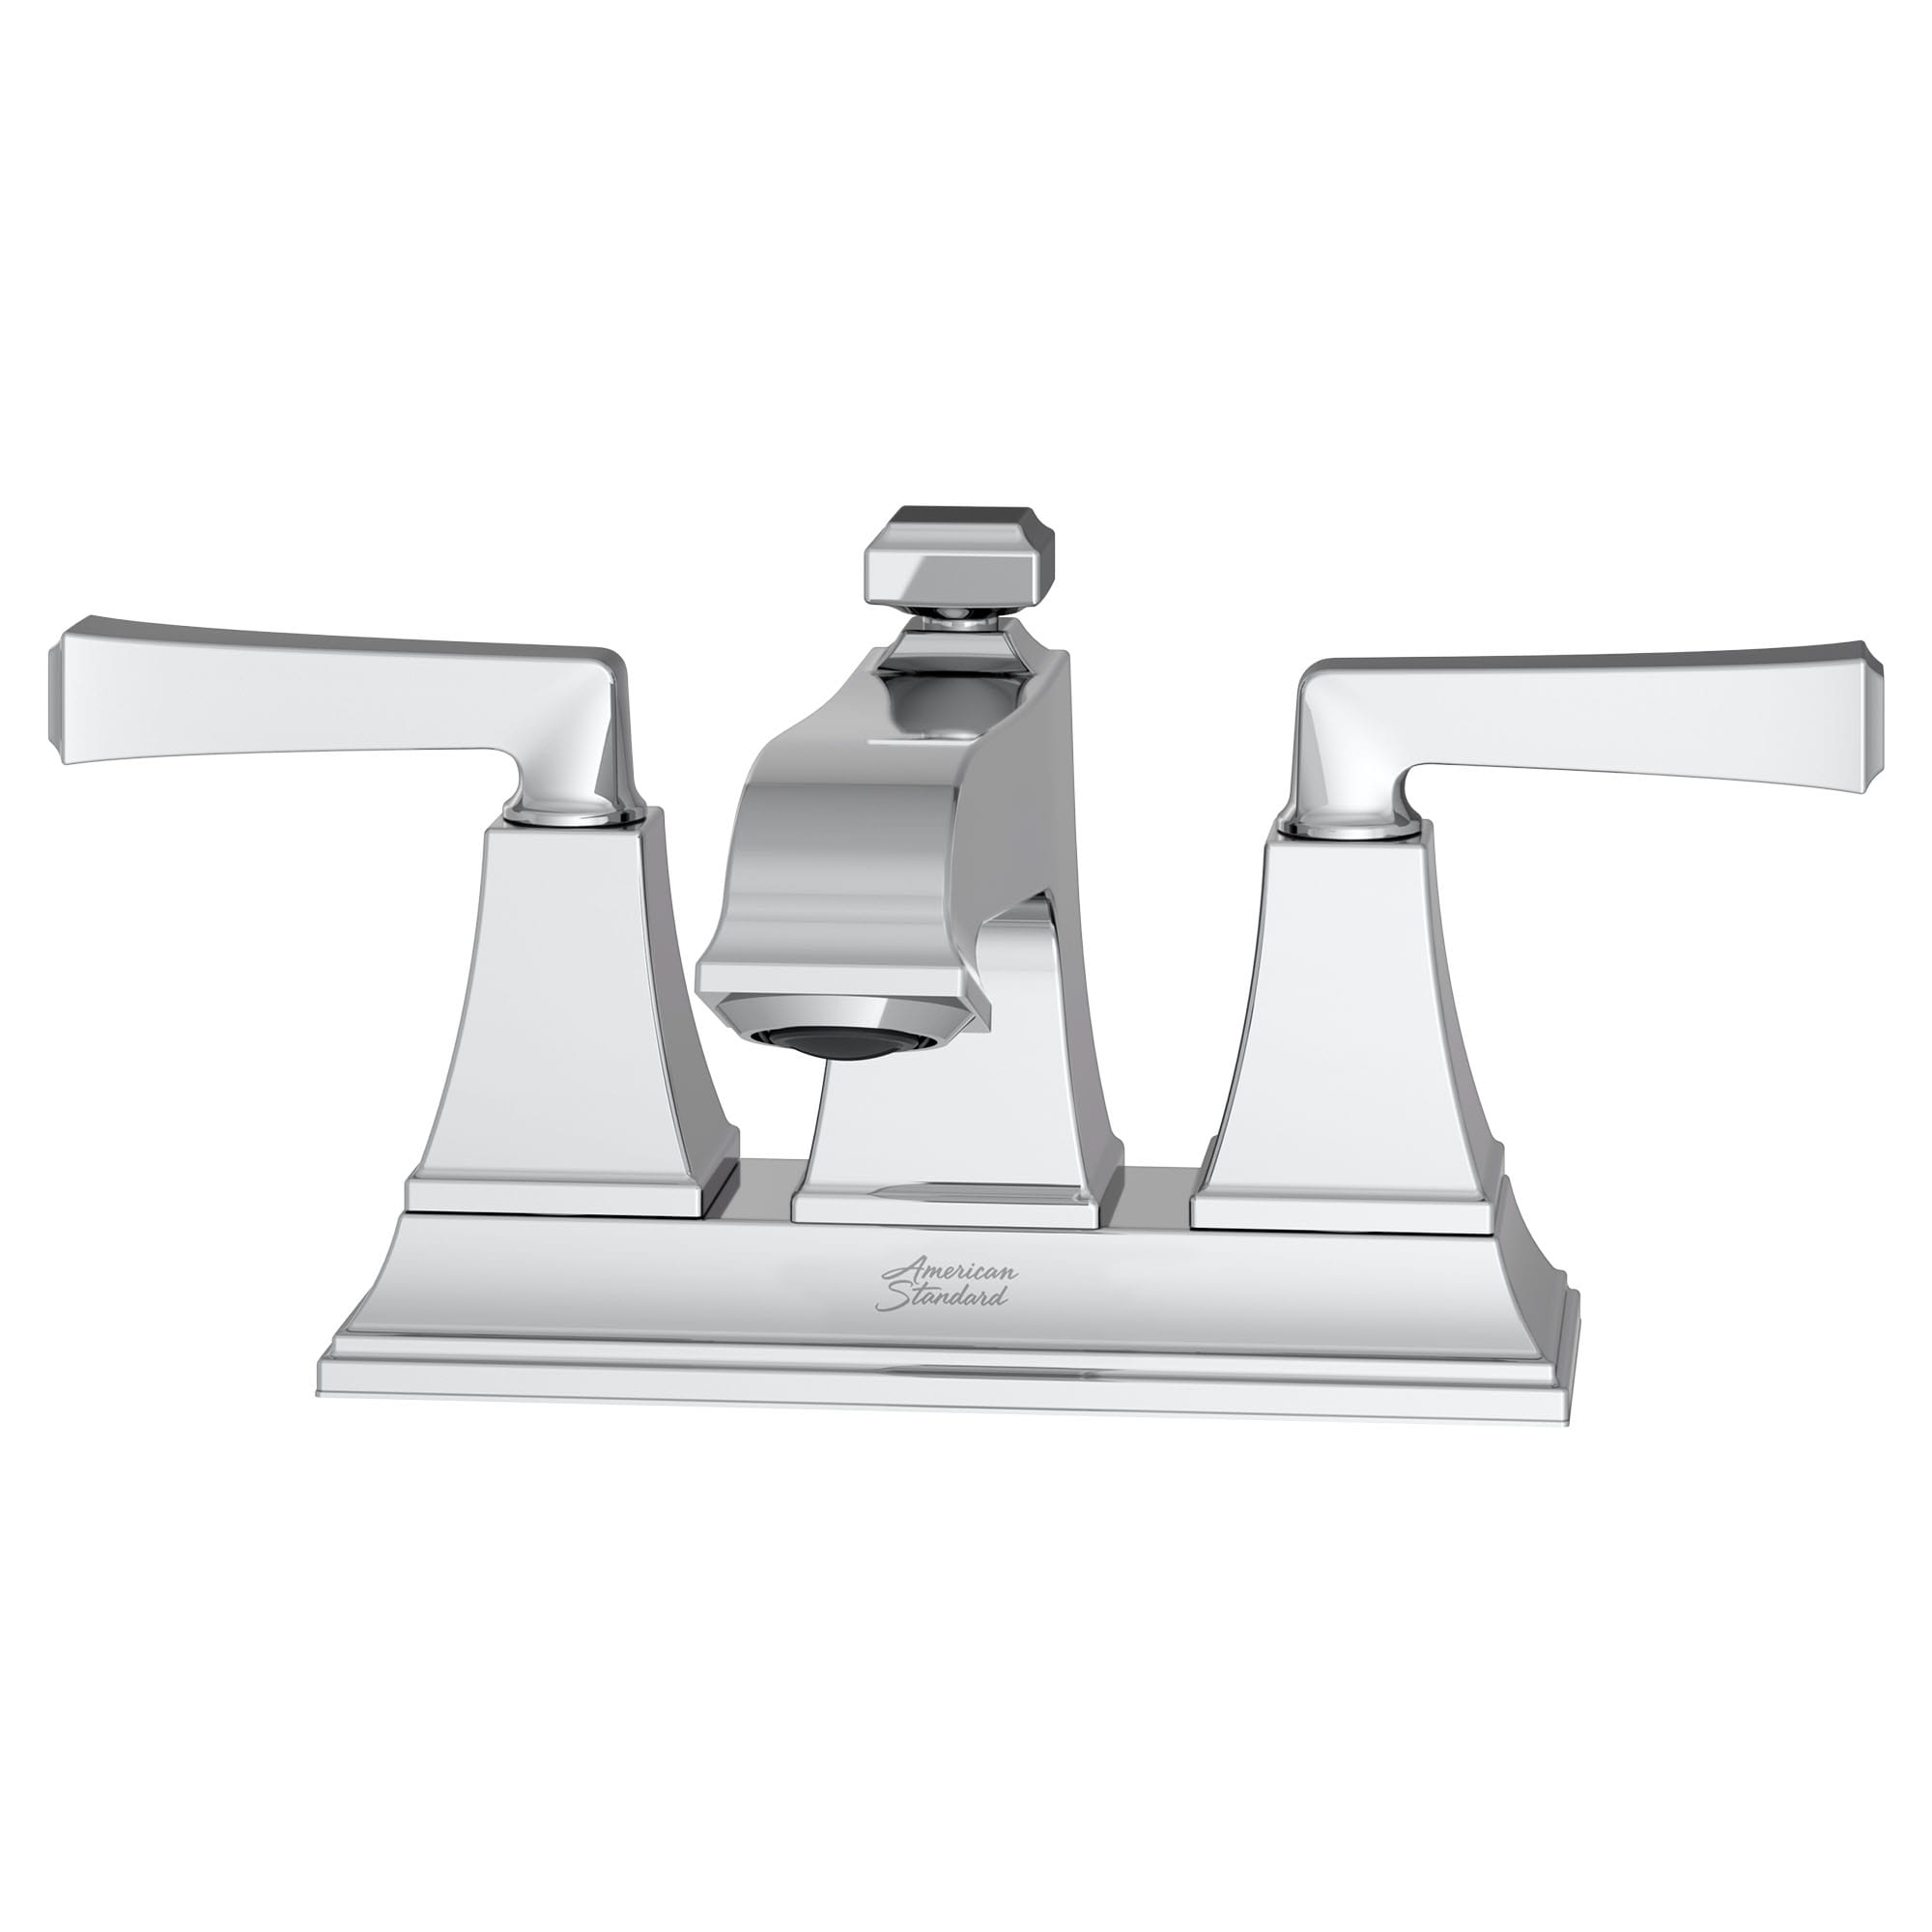 Town Square S 4 Inch Centerset 2 Handle Bathroom Faucet 12 gpm 45 L min With Lever Handles CHROME